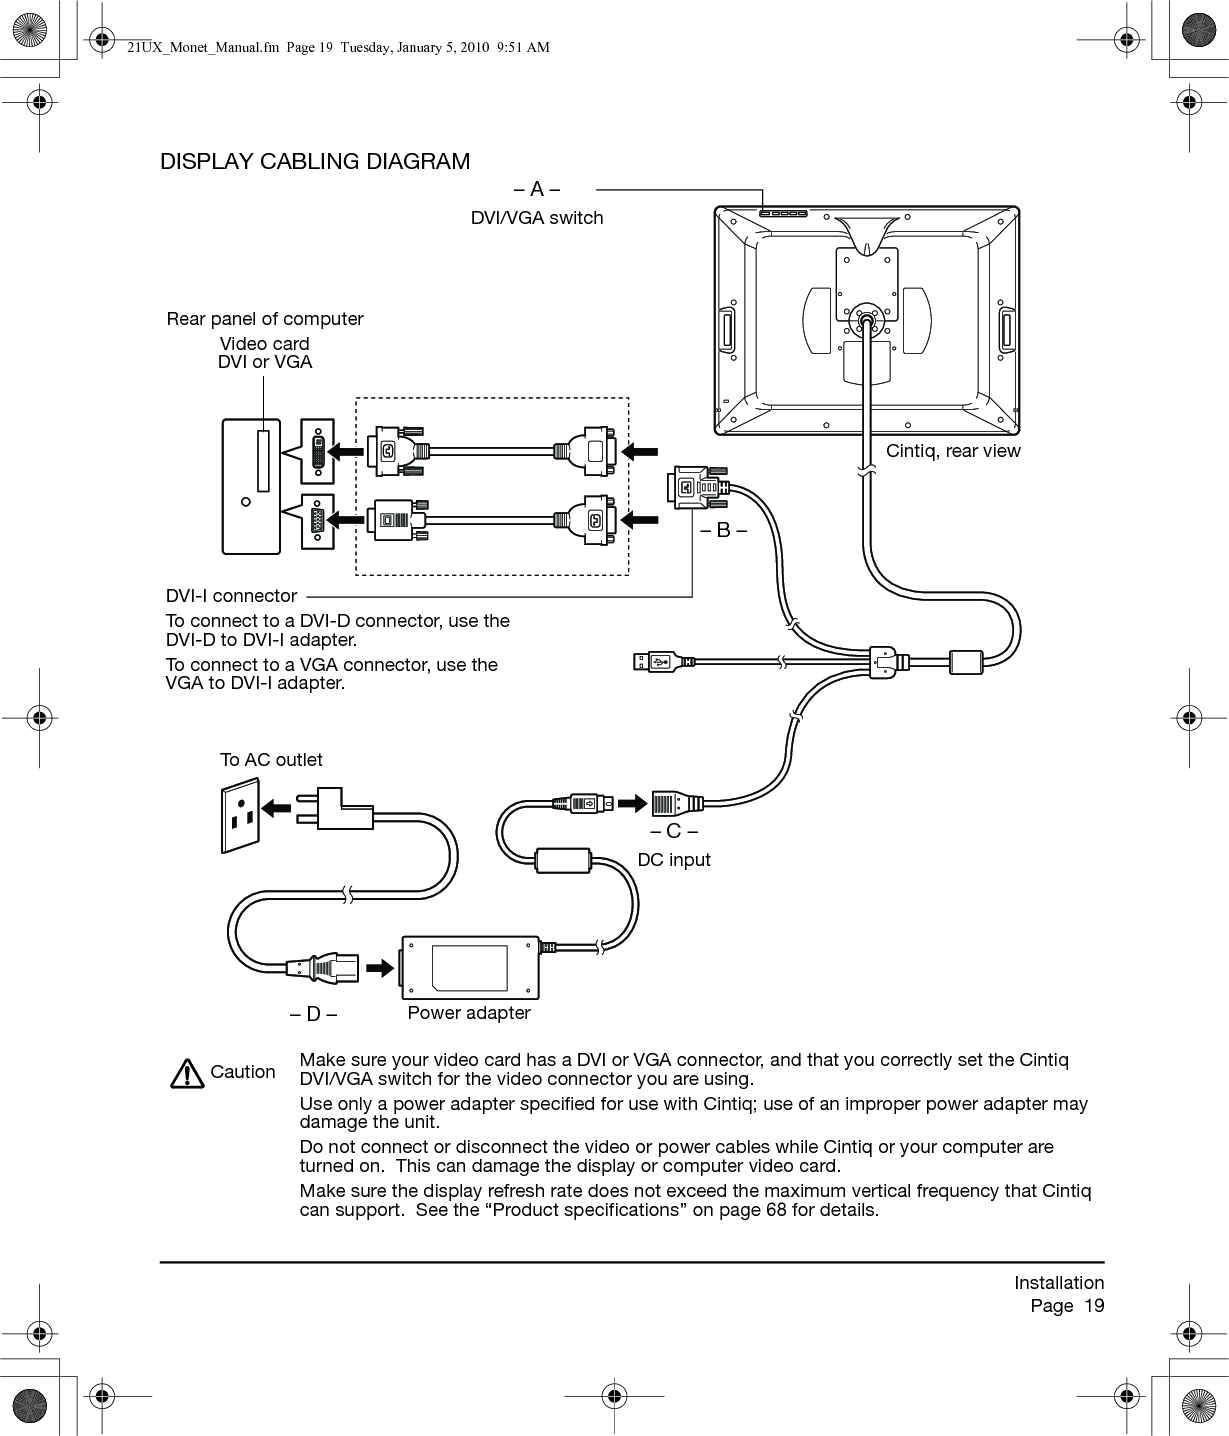 InstallationPage  19DISPLAY CABLING DIAGRAM– A –DVI/VGA switchRear panel of computerVideo cardDVI or VGA– C –DC input– B –DVI-I connectorTo connect to a DVI-D connector, use the DVI-D to DVI-I adapter.To connect to a VGA connector, use the VGA to DVI-I adapter.Cintiq, rear viewPower adapter– D –To A C  o u t l e tMake sure your video card has a DVI or VGA connector, and that you correctly set the Cintiq DVI/VGA switch for the video connector you are using.Use only a power adapter specified for use with Cintiq; use of an improper power adapter may damage the unit.Do not connect or disconnect the video or power cables while Cintiq or your computer are turned on.  This can damage the display or computer video card.Make sure the display refresh rate does not exceed the maximum vertical frequency that Cintiq can support.  See the “Product specifications” on page 68 for details.Caution21UX_Monet_Manual.fm  Page 19  Tuesday, January 5, 2010  9:51 AM